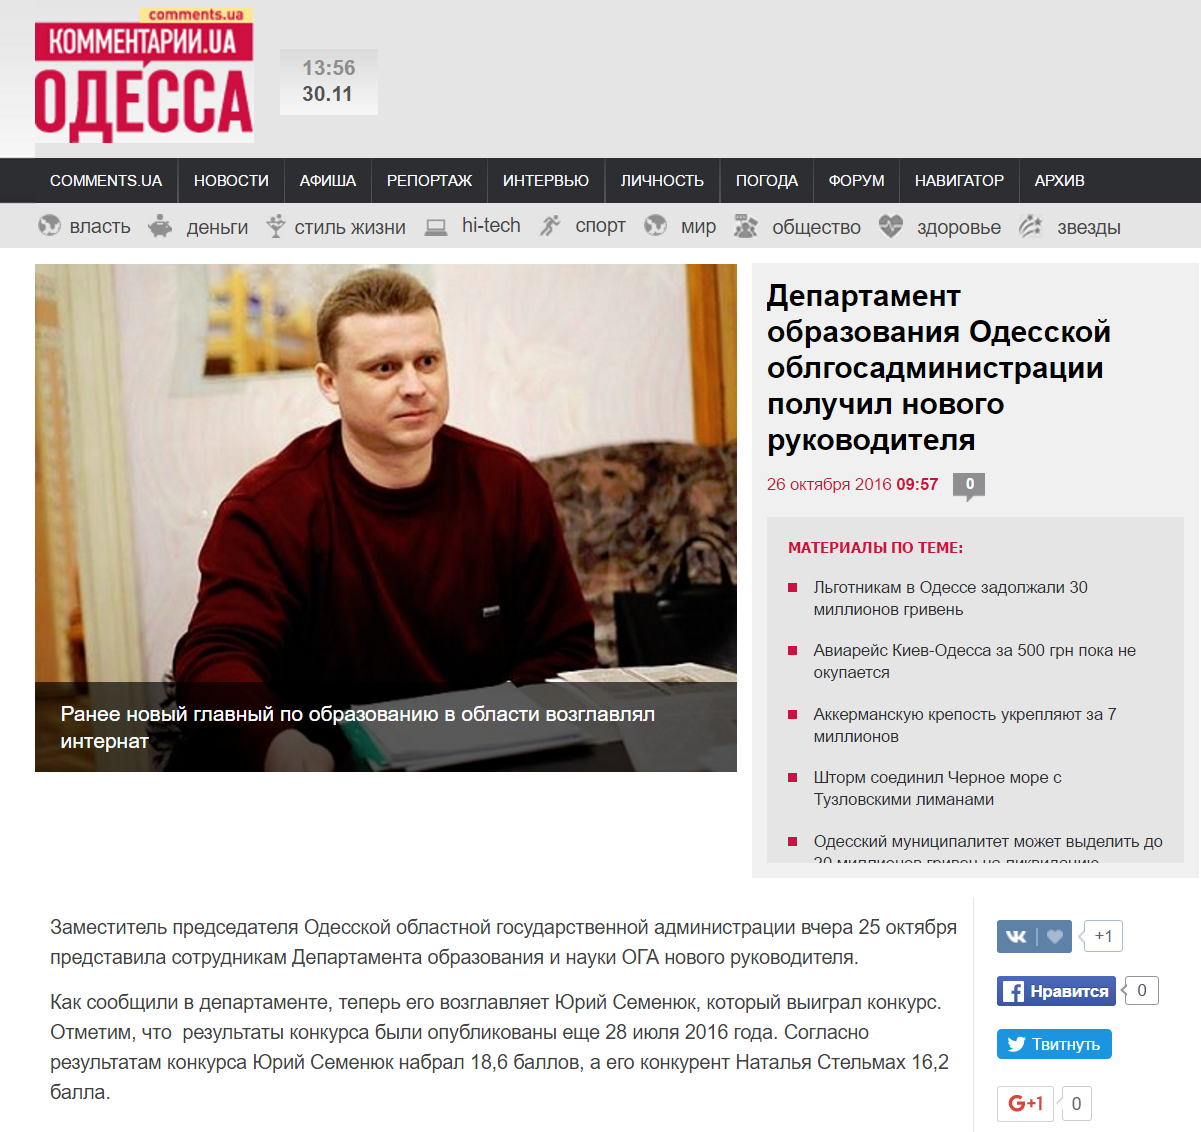 http://odessa.comments.ua/news/2016/10/26/095724.html